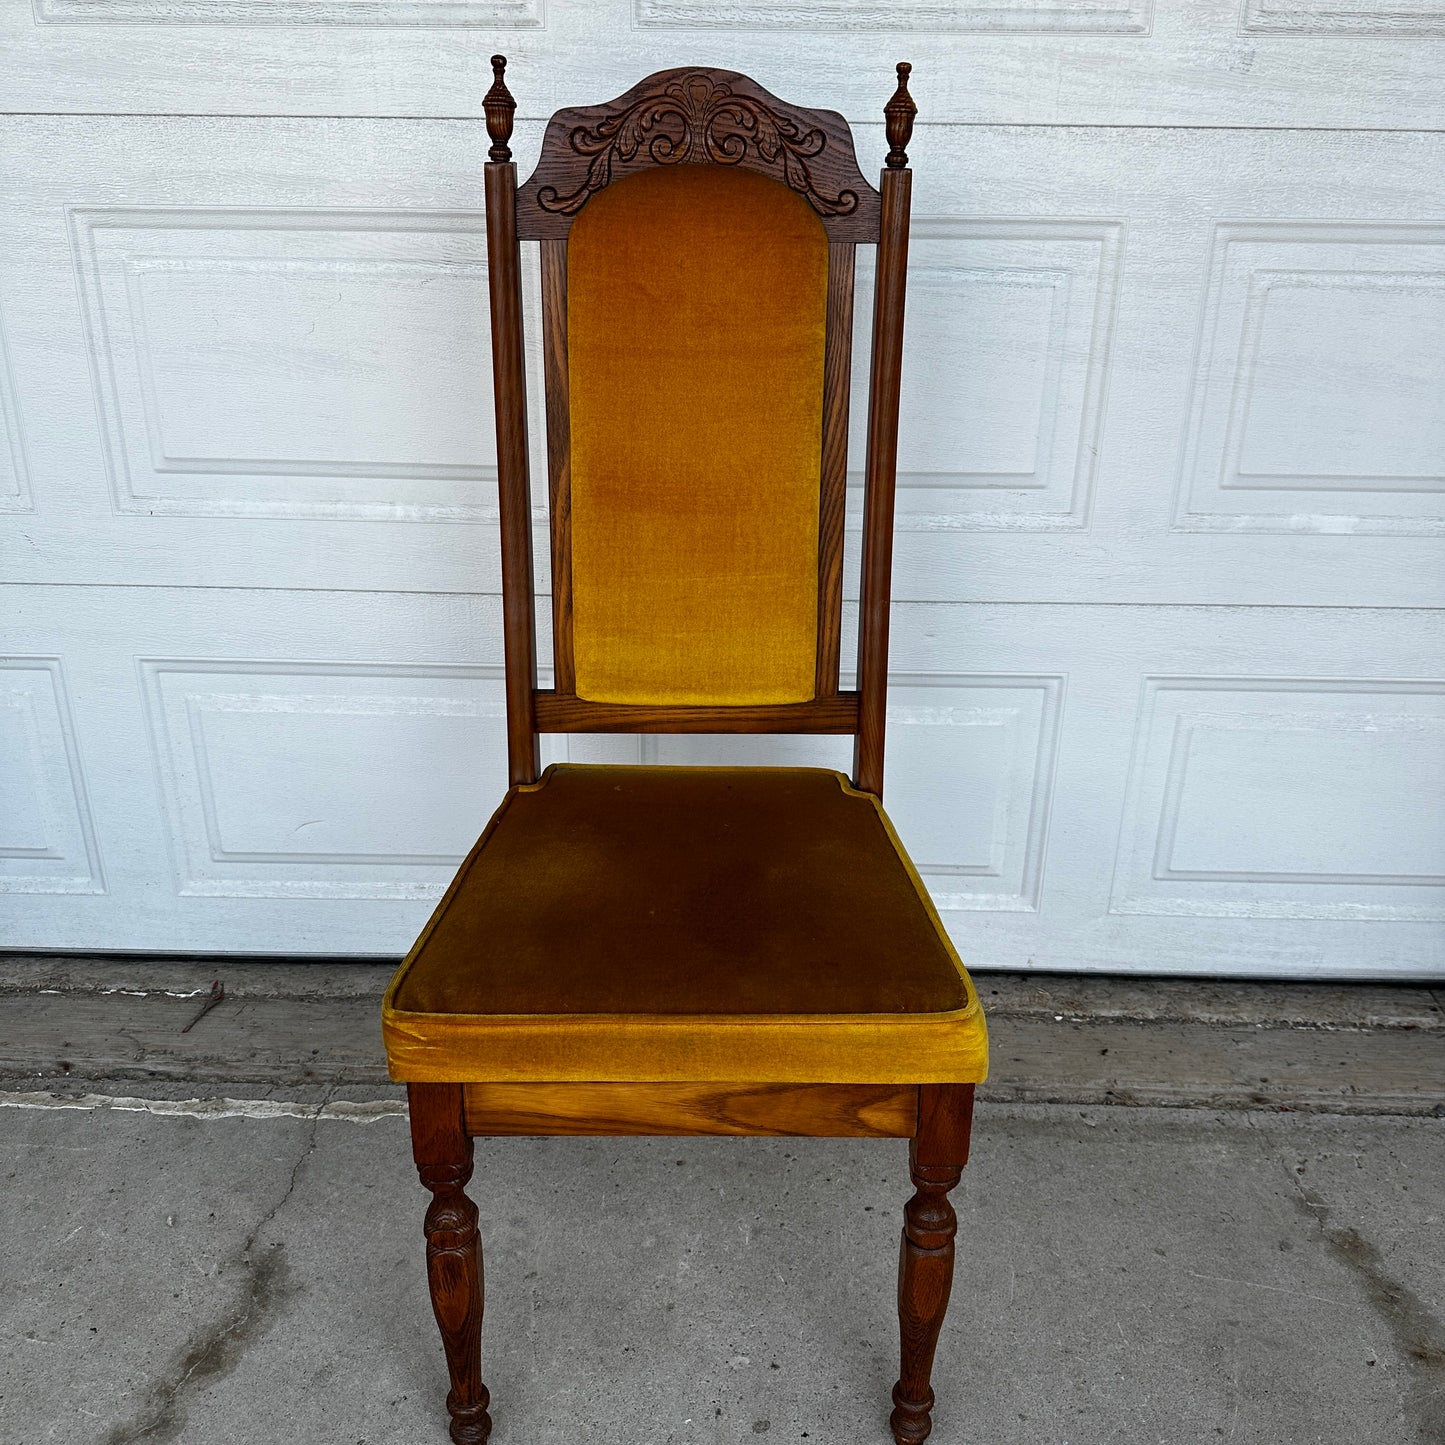 Vintage Yellow Cushioned Chair Without Arms